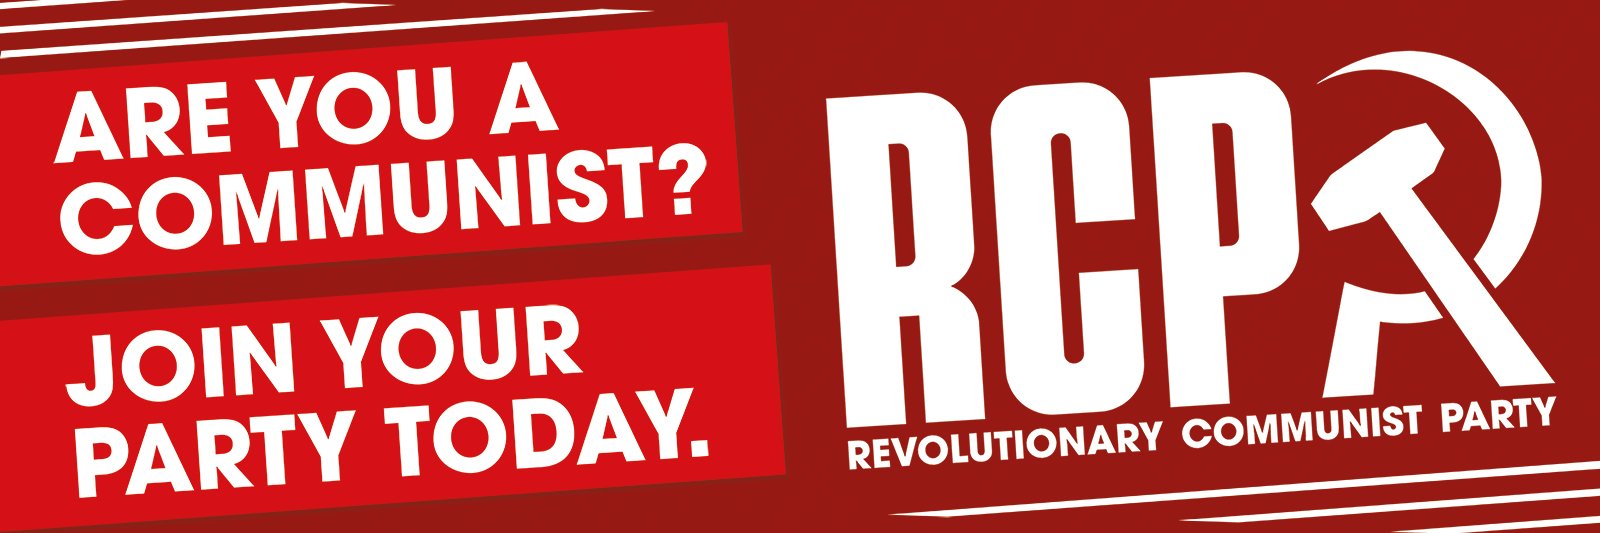 80 years since the founding of the original Revolutionary Communist ...